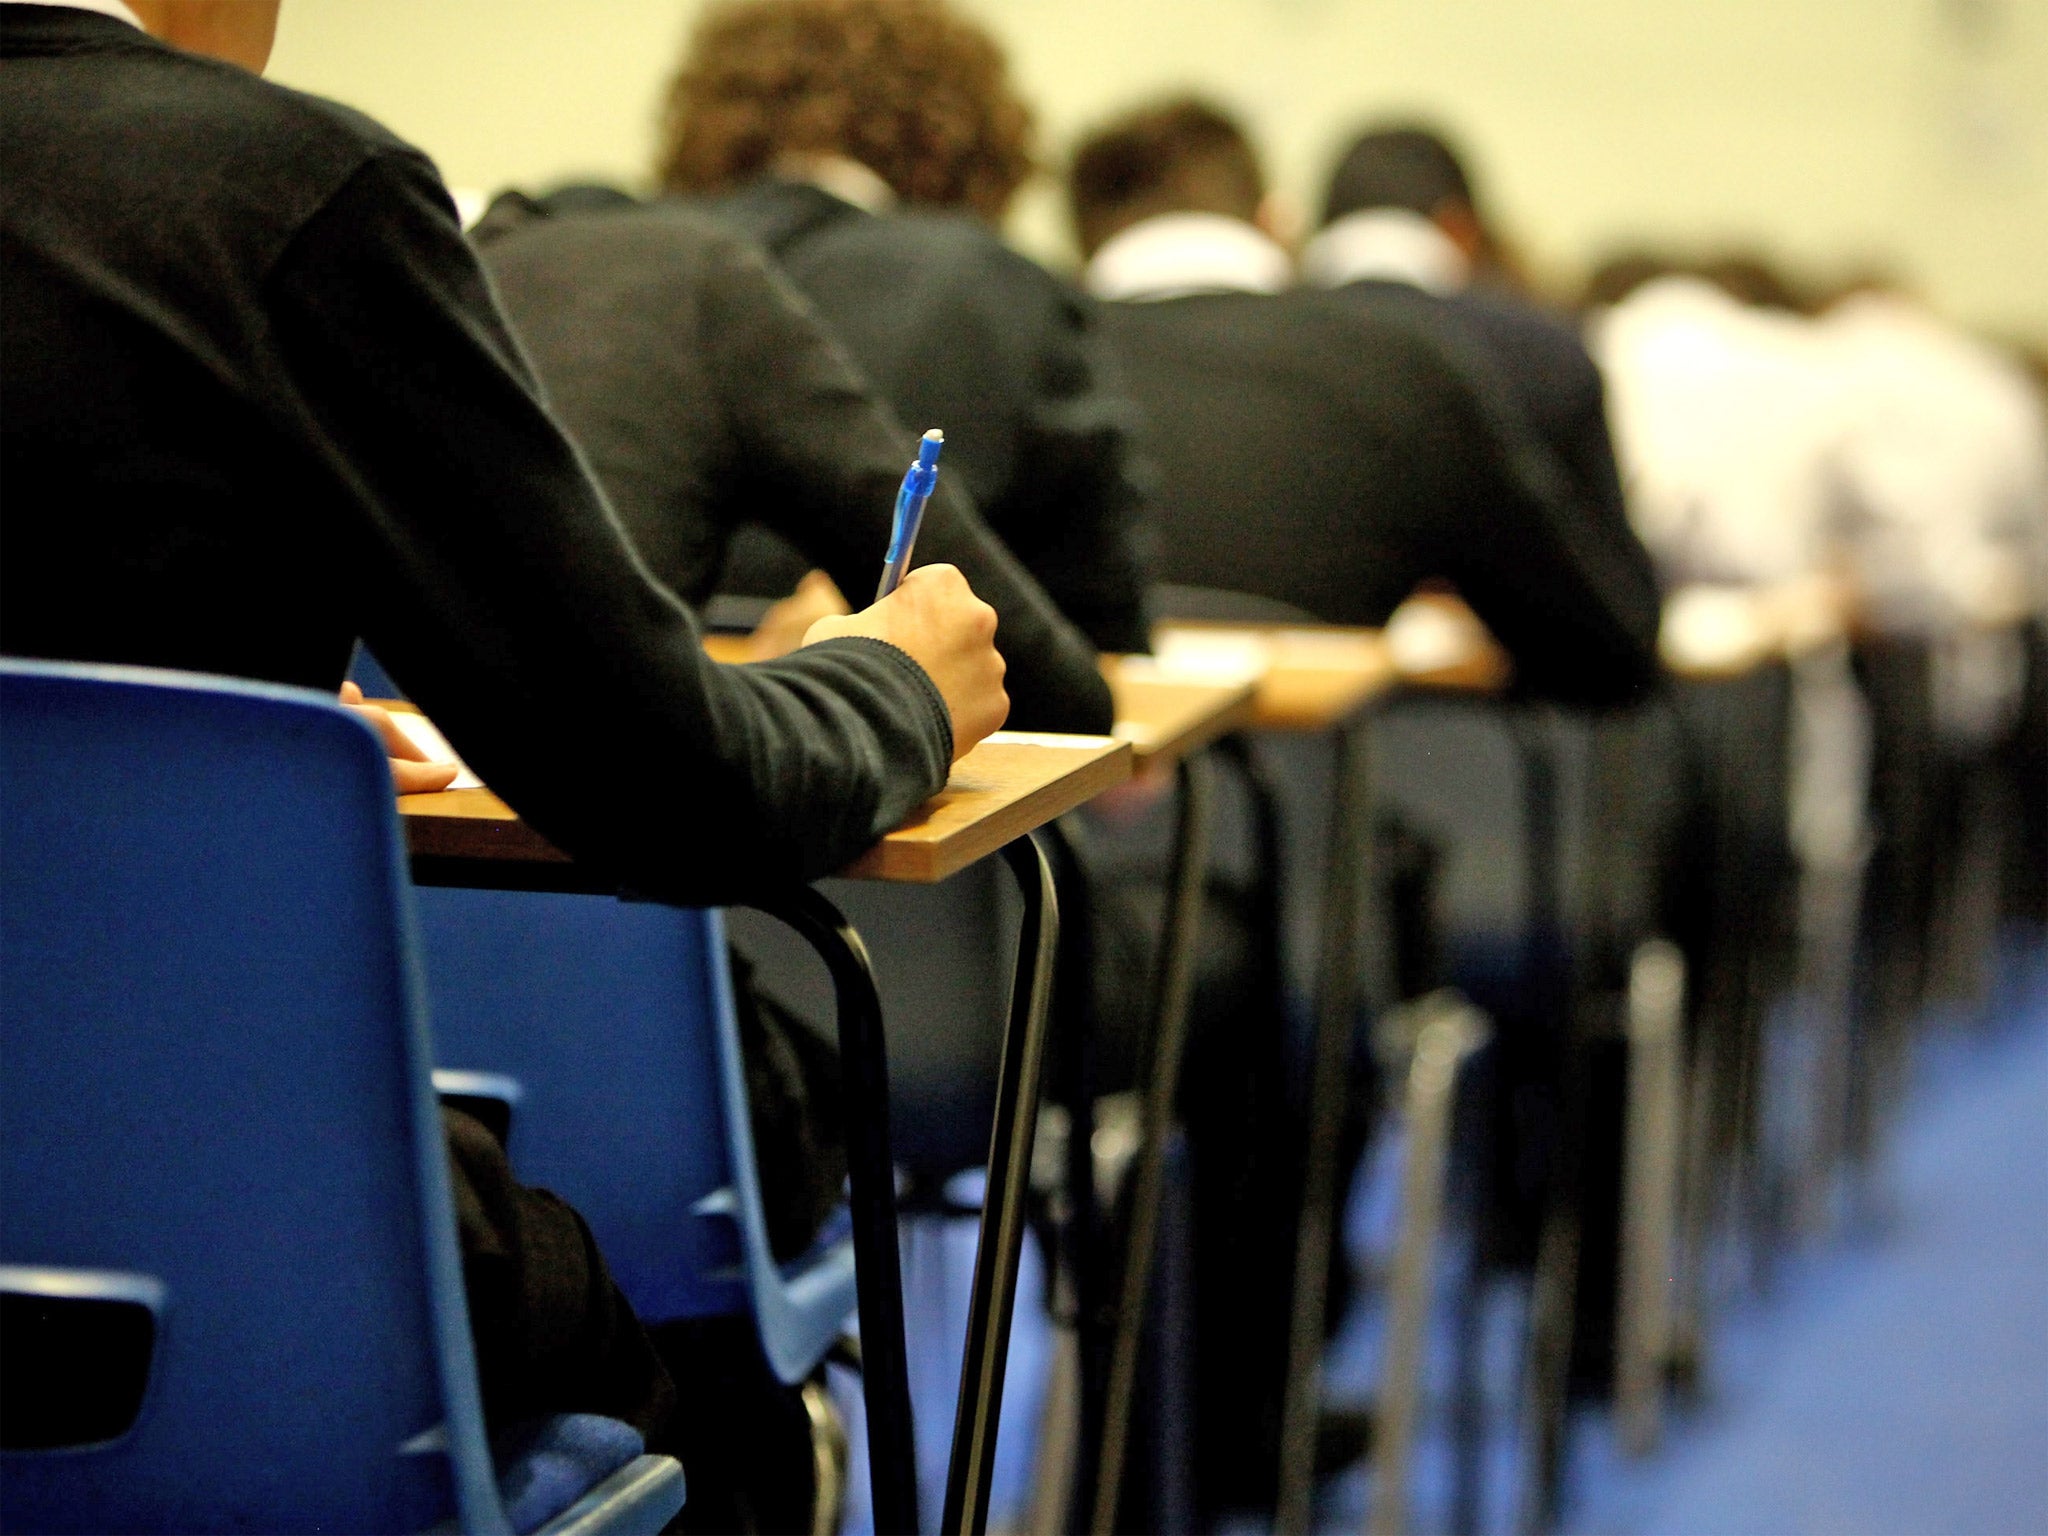 The report urges schools to provide annual reports to parents on their brightest pupils